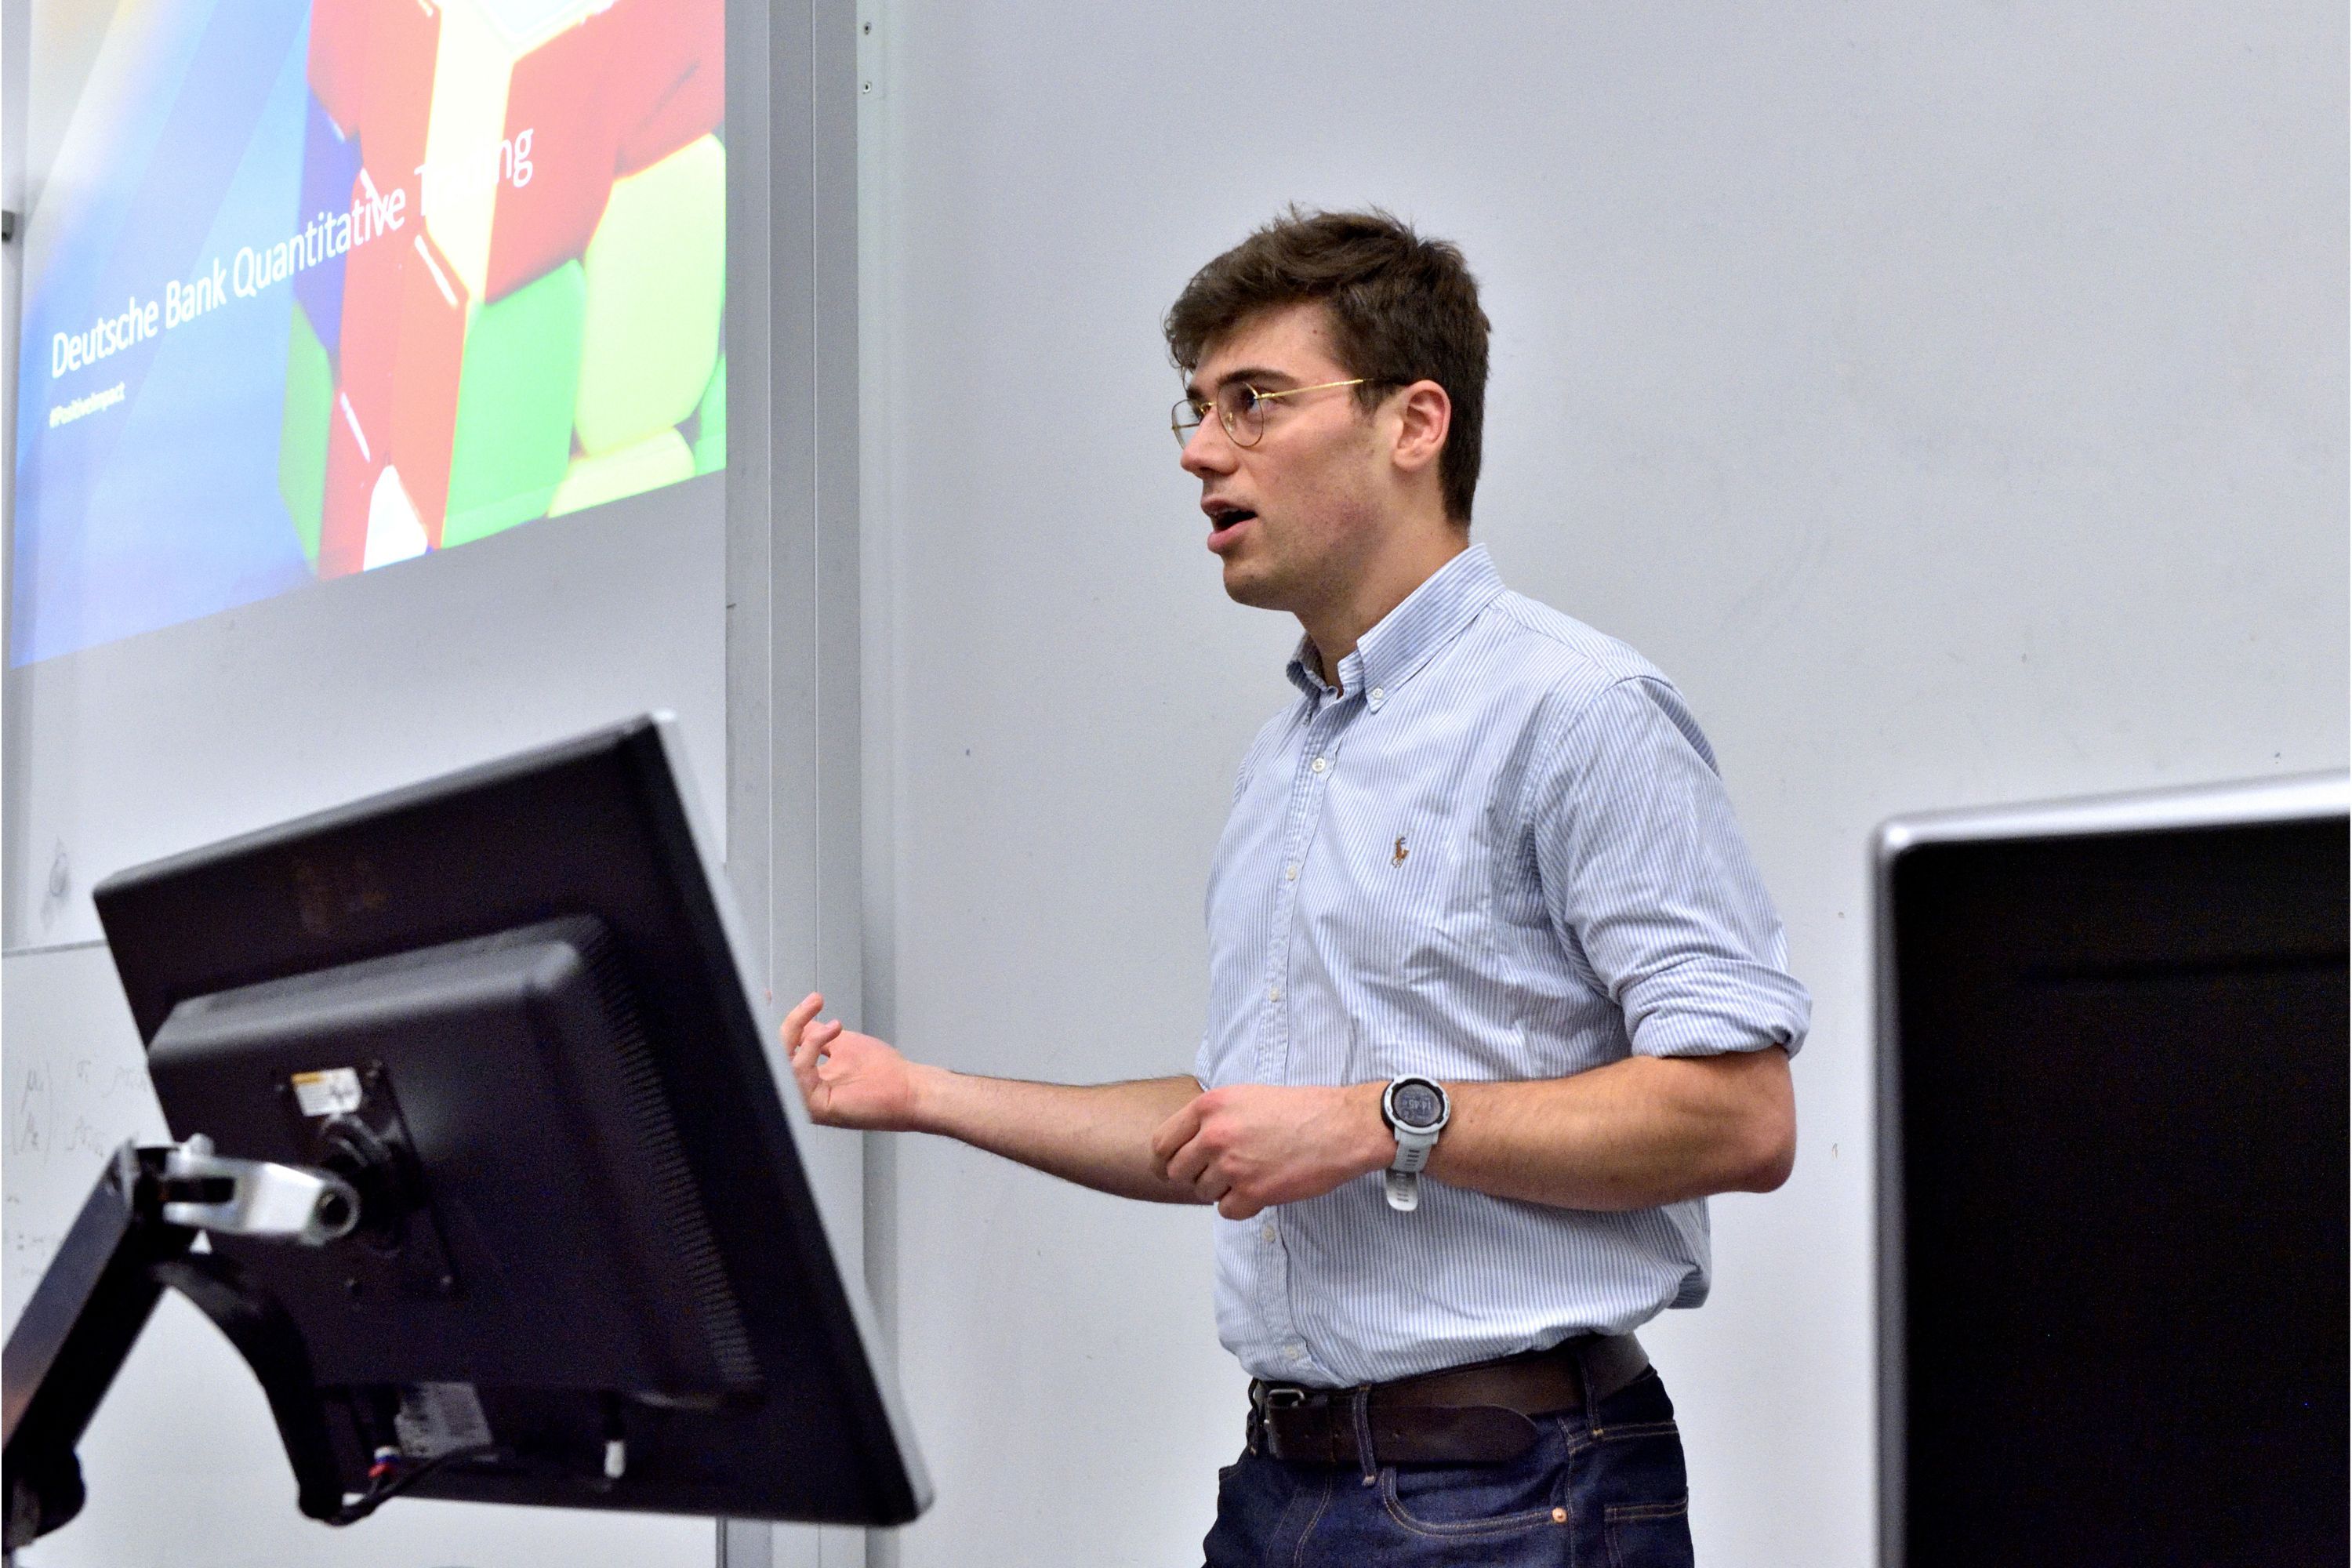 a male lecturer presenting in front of a screen